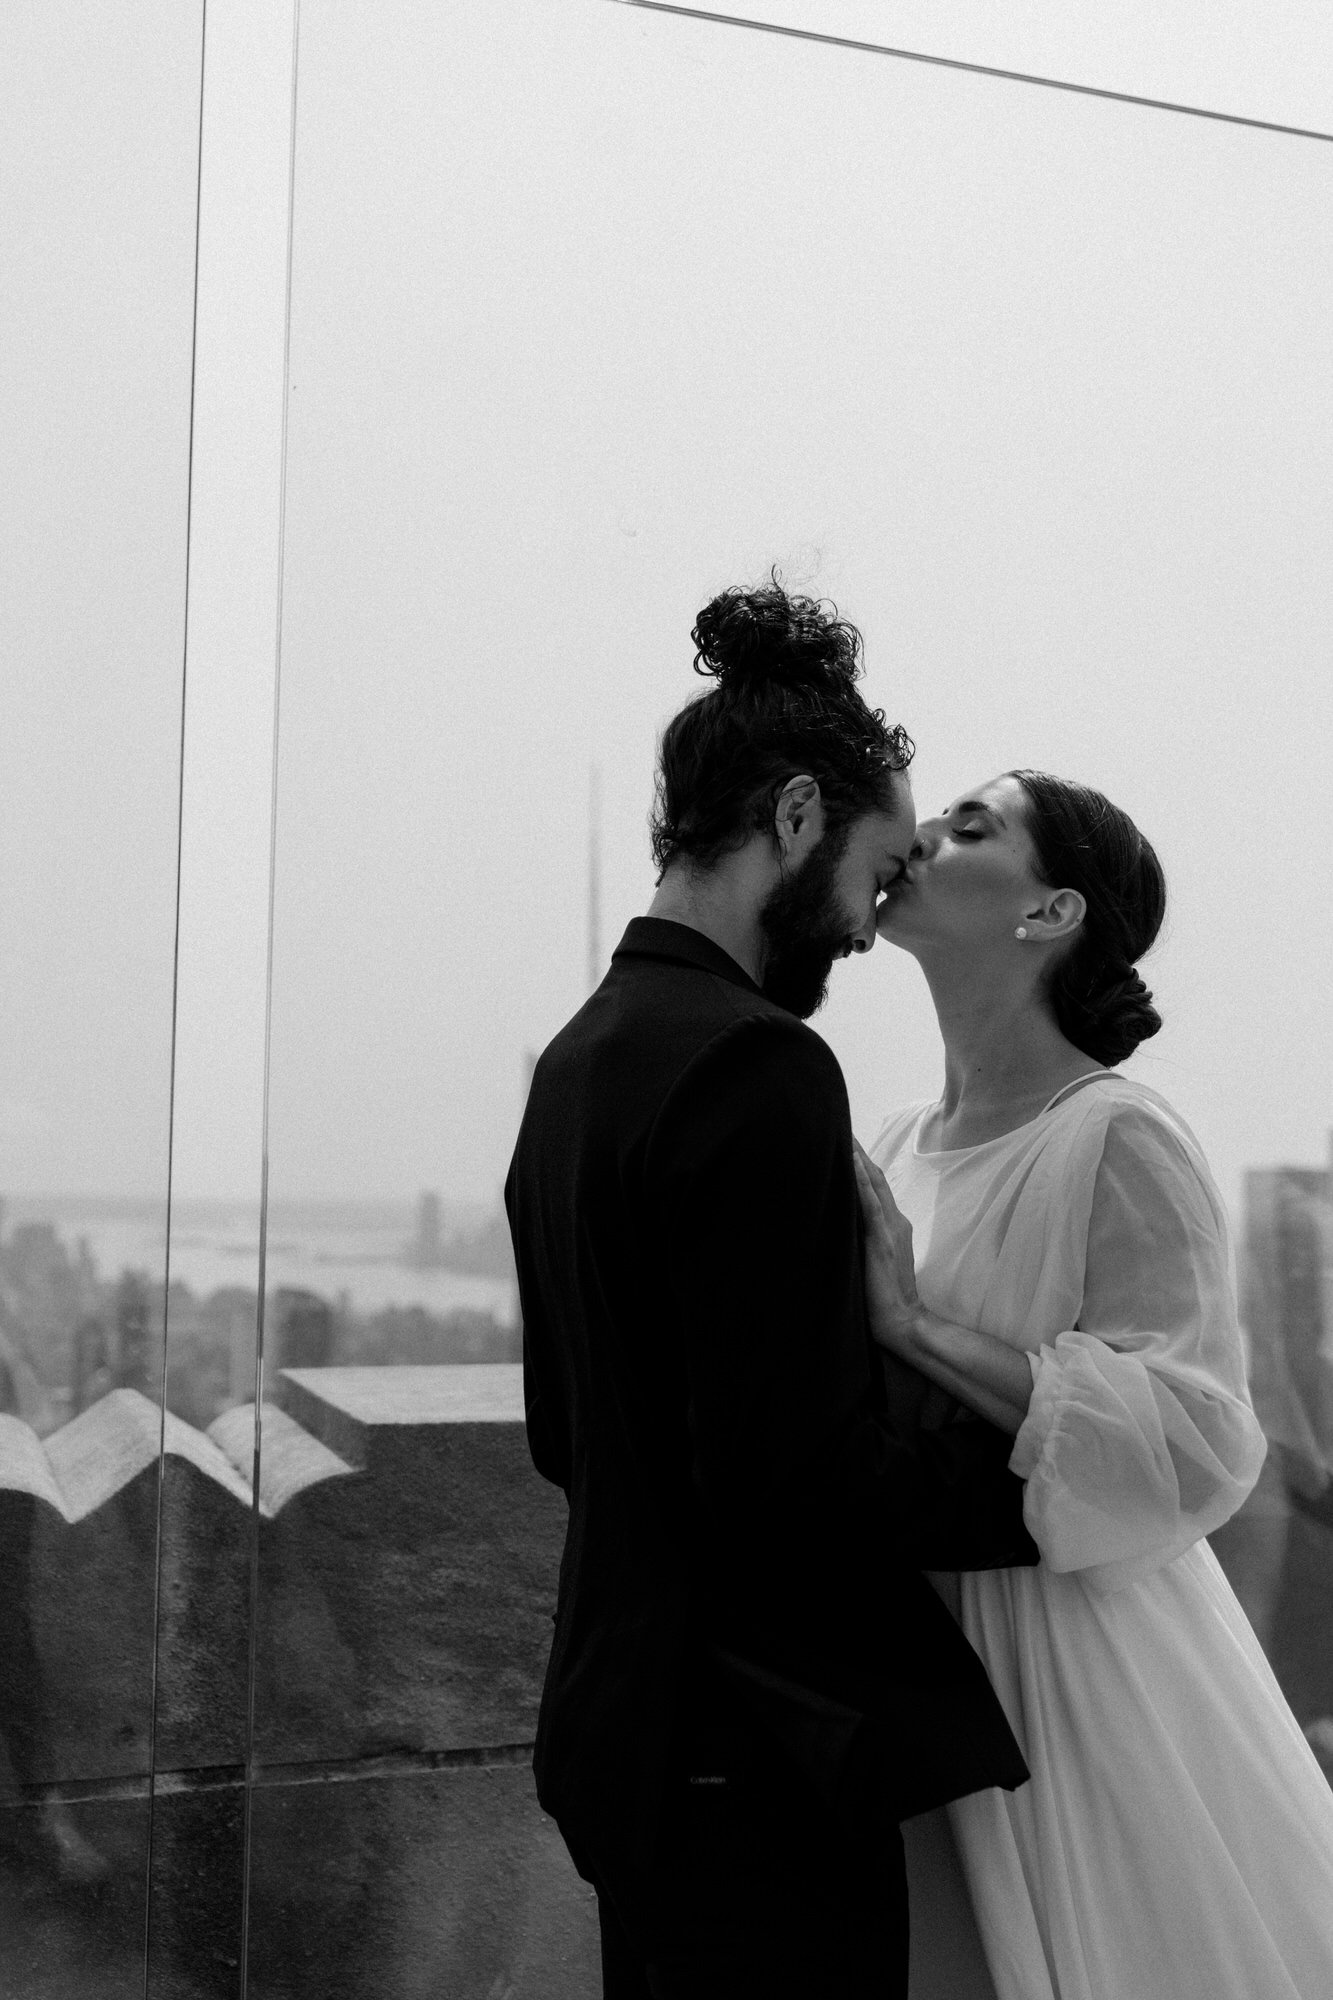 NYC-Top-of-The-Rock-Elopement-NYC-Photographer-Steph-Powell-Creative-47.jpg